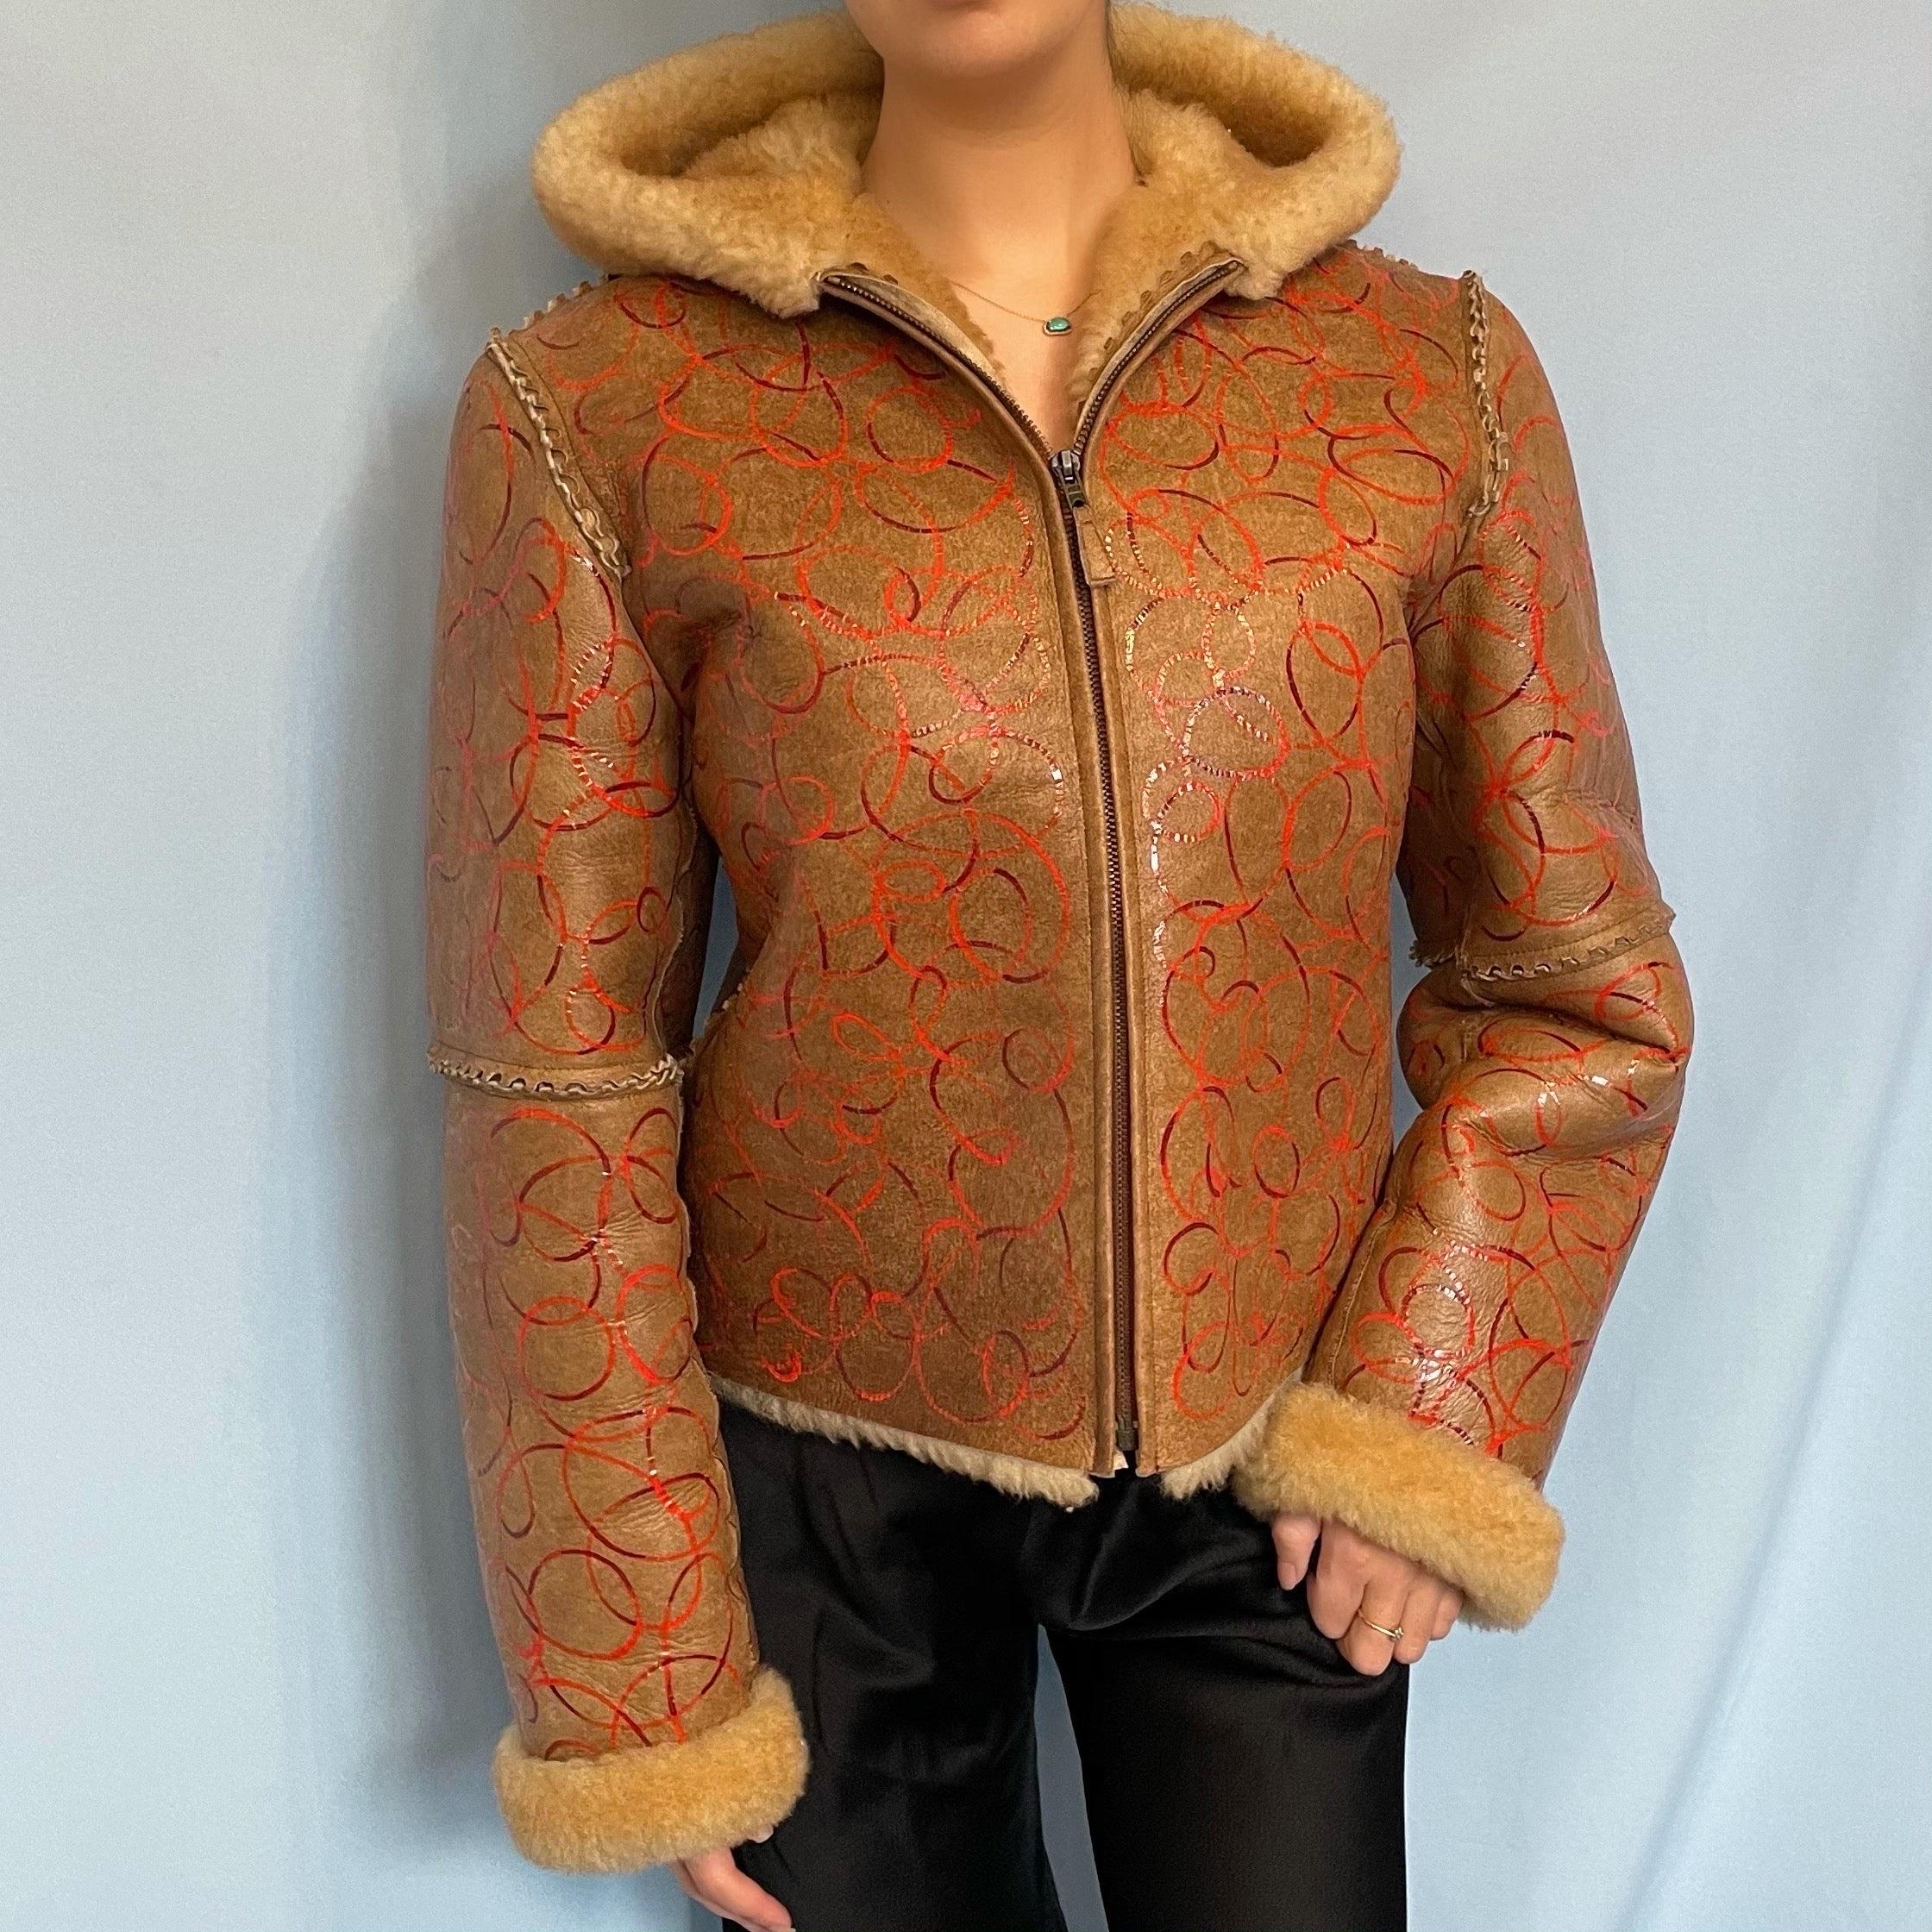 Vintage Azzedine Alaïa

Early 1990s   

Brown shearling leather jacket 

Circle pattern all over

Hooded 

Zip up

Size EU 38 / UK 10 / US 6 - size tag removed 